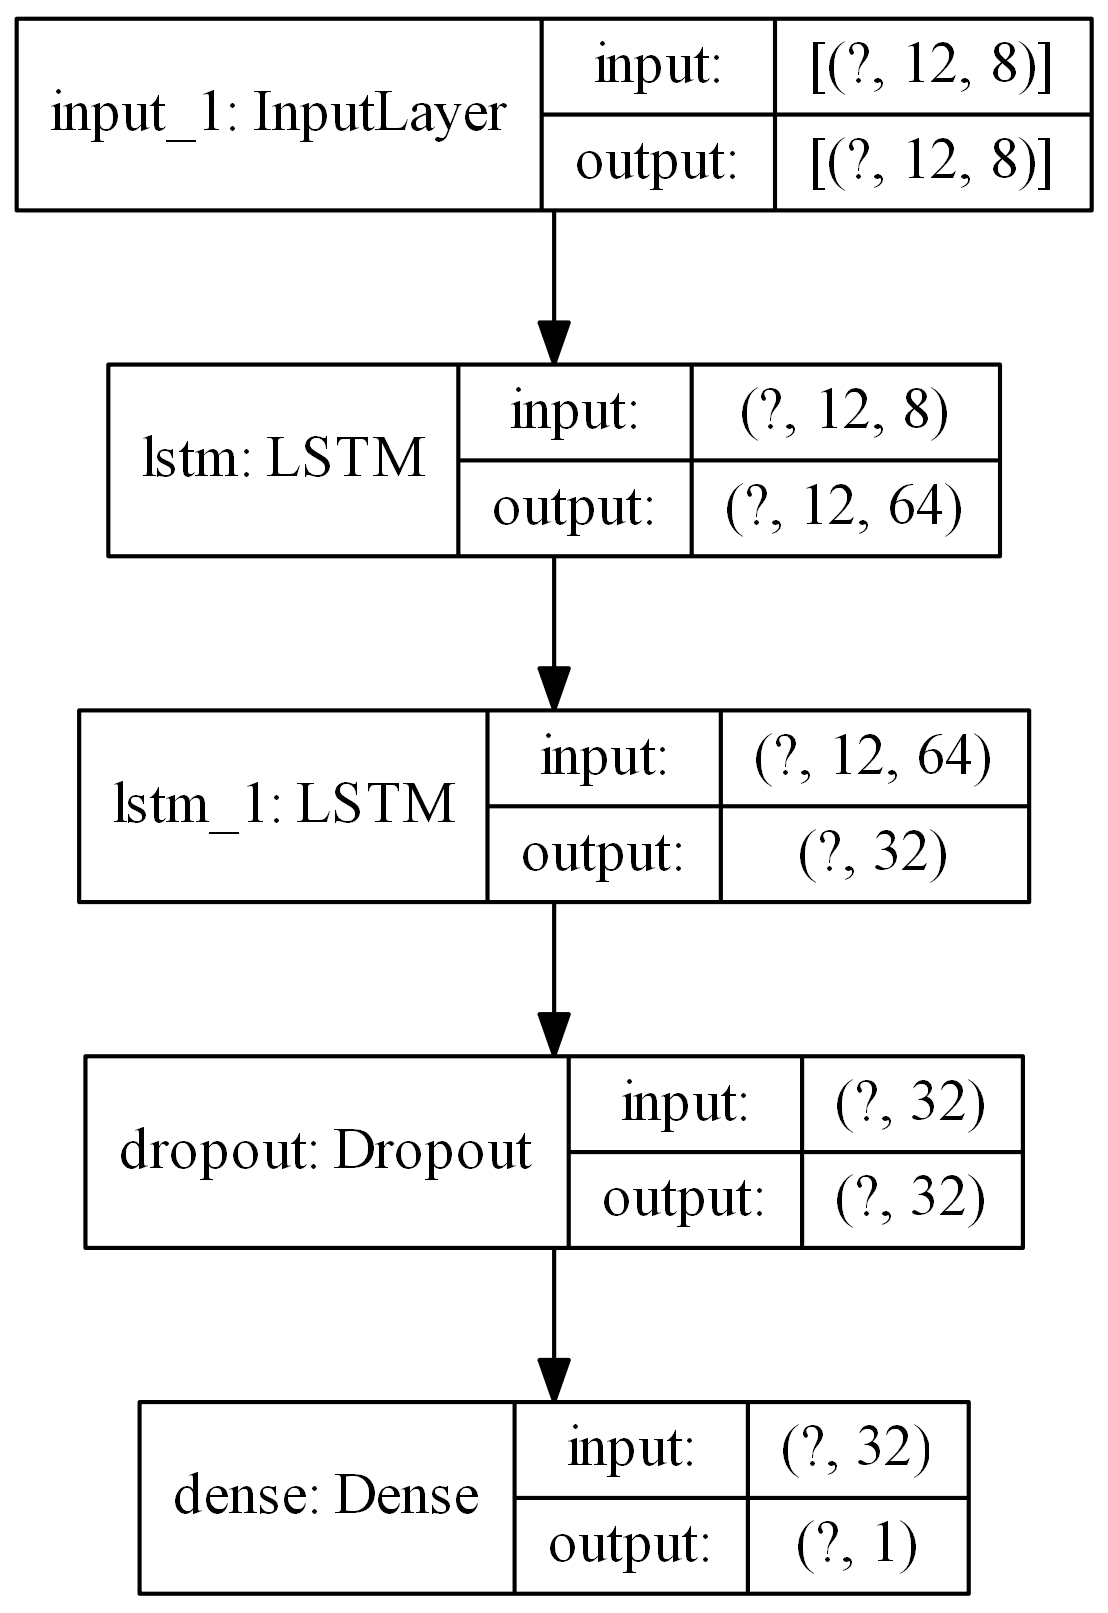 _images/lstm.png